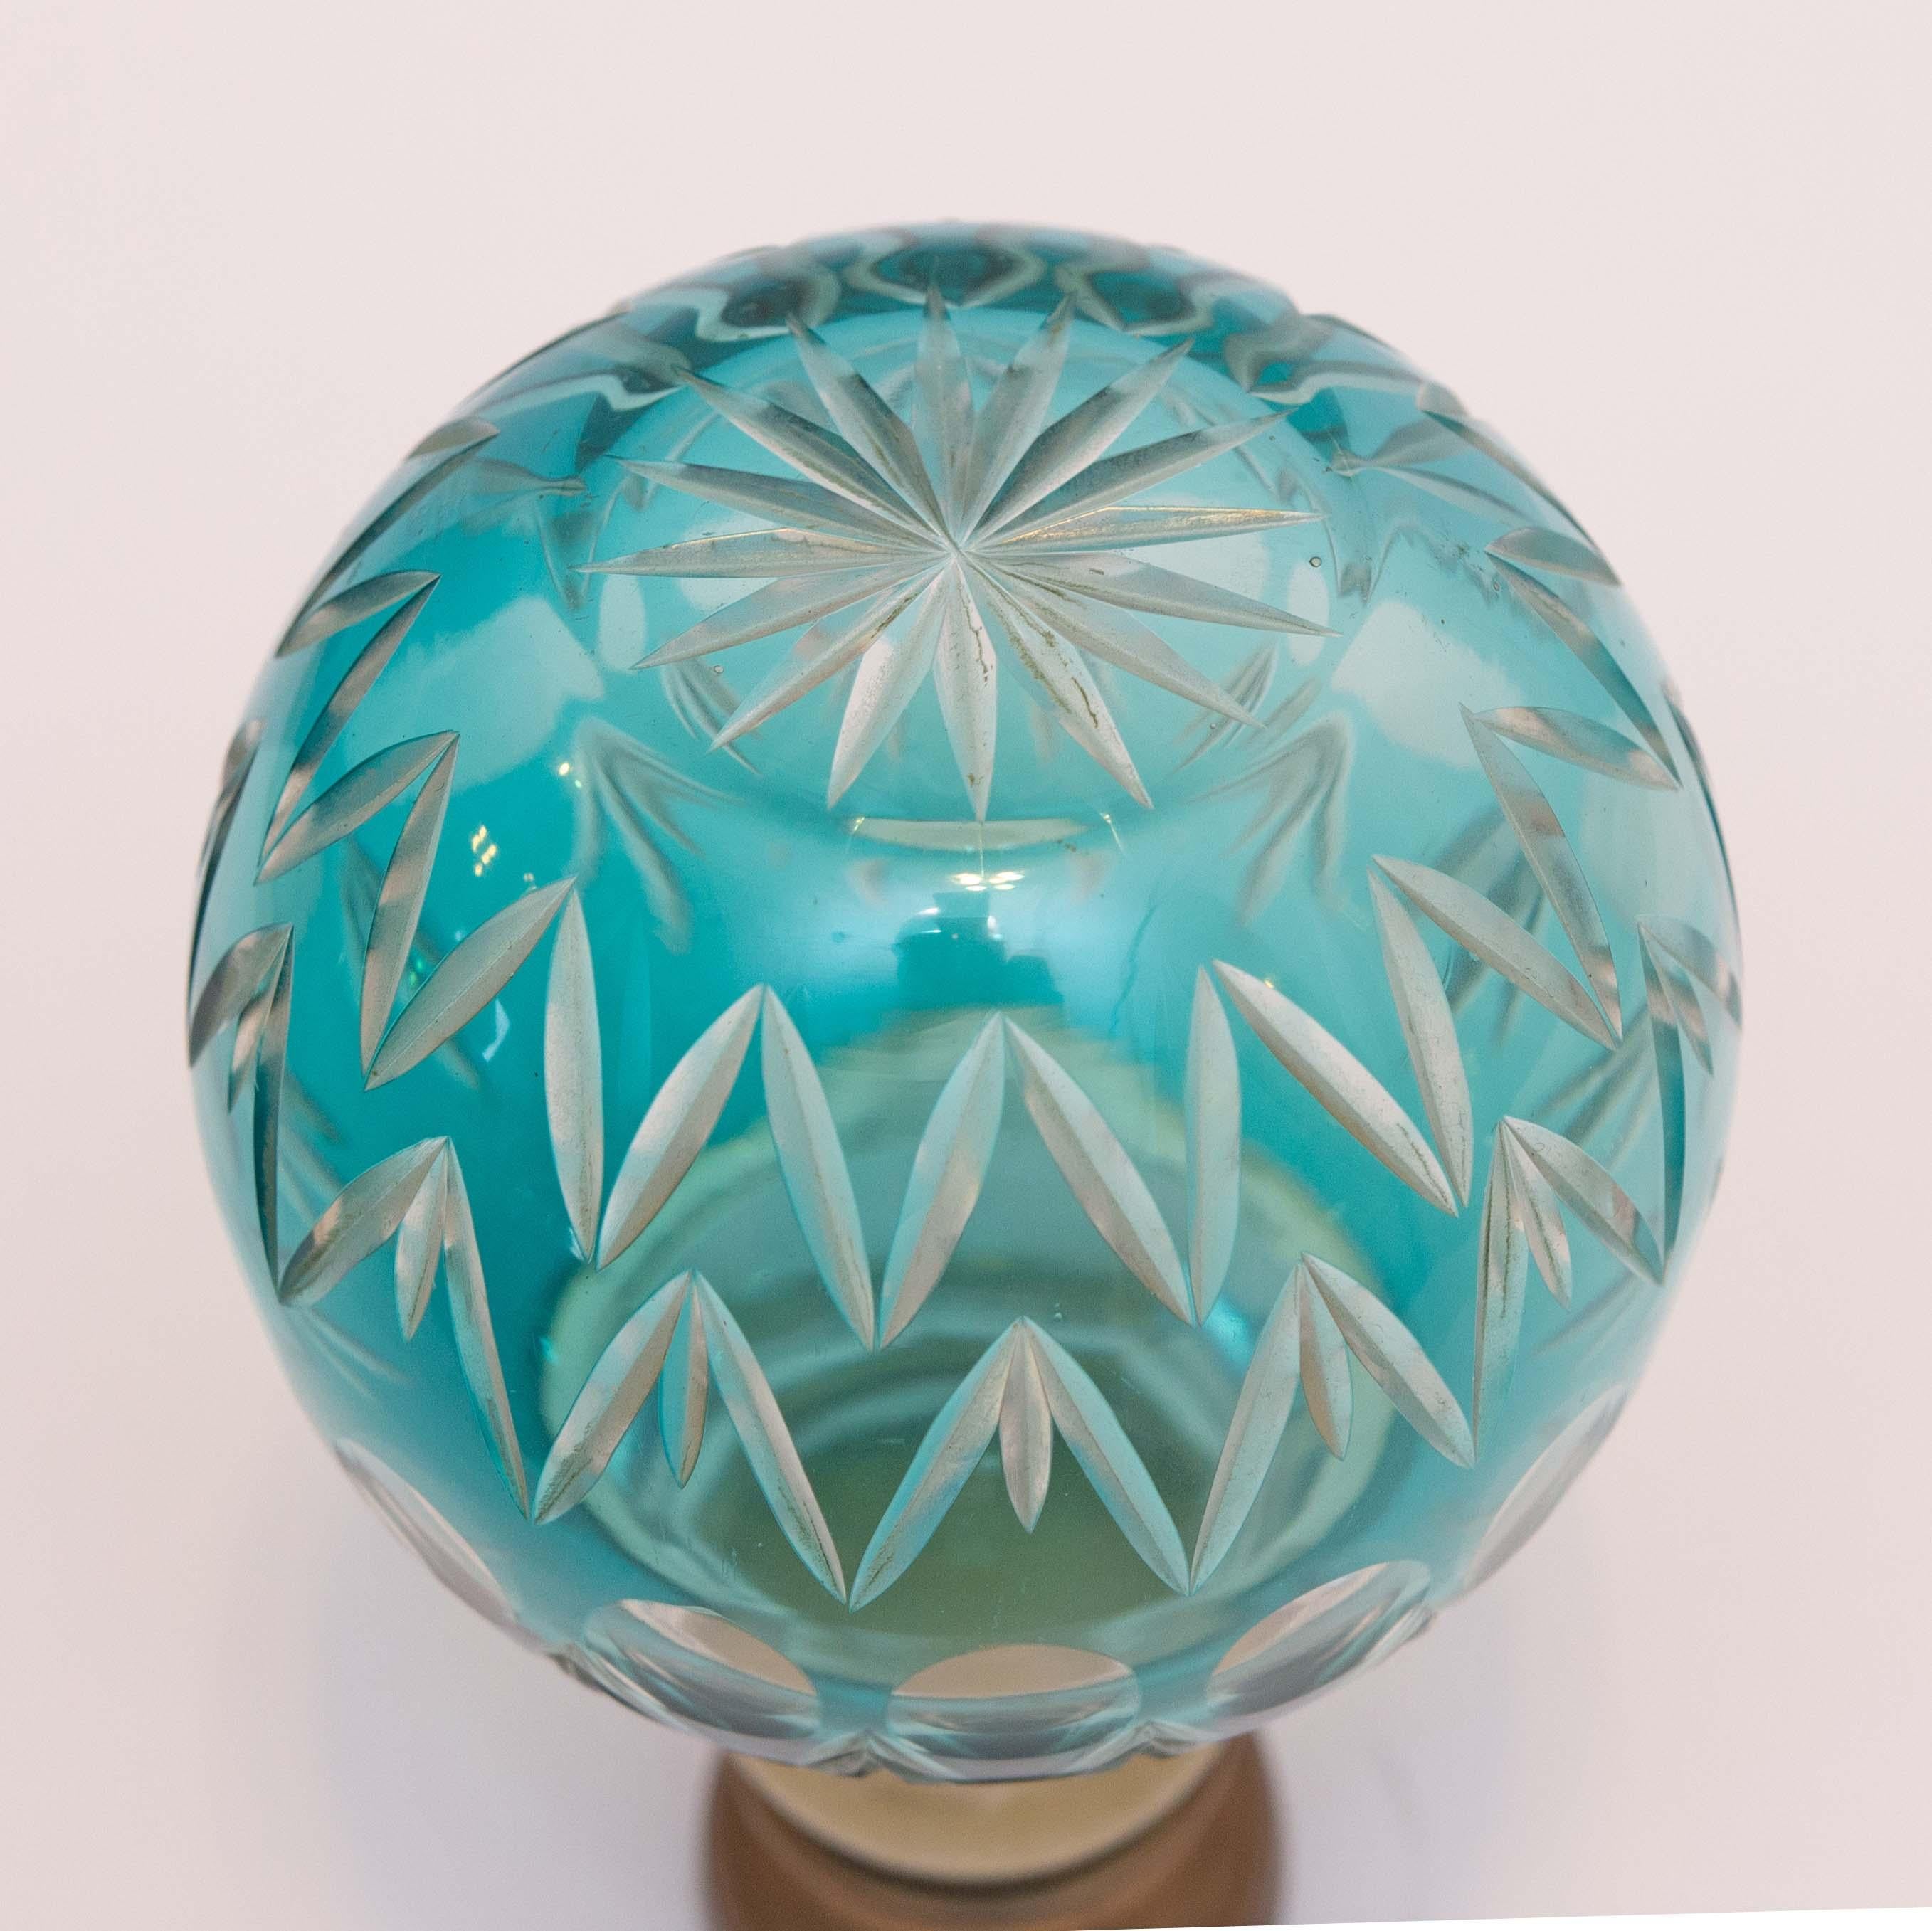 Large turquoise cut glass newel post finial. French. Early 20th century. From an estate collection.